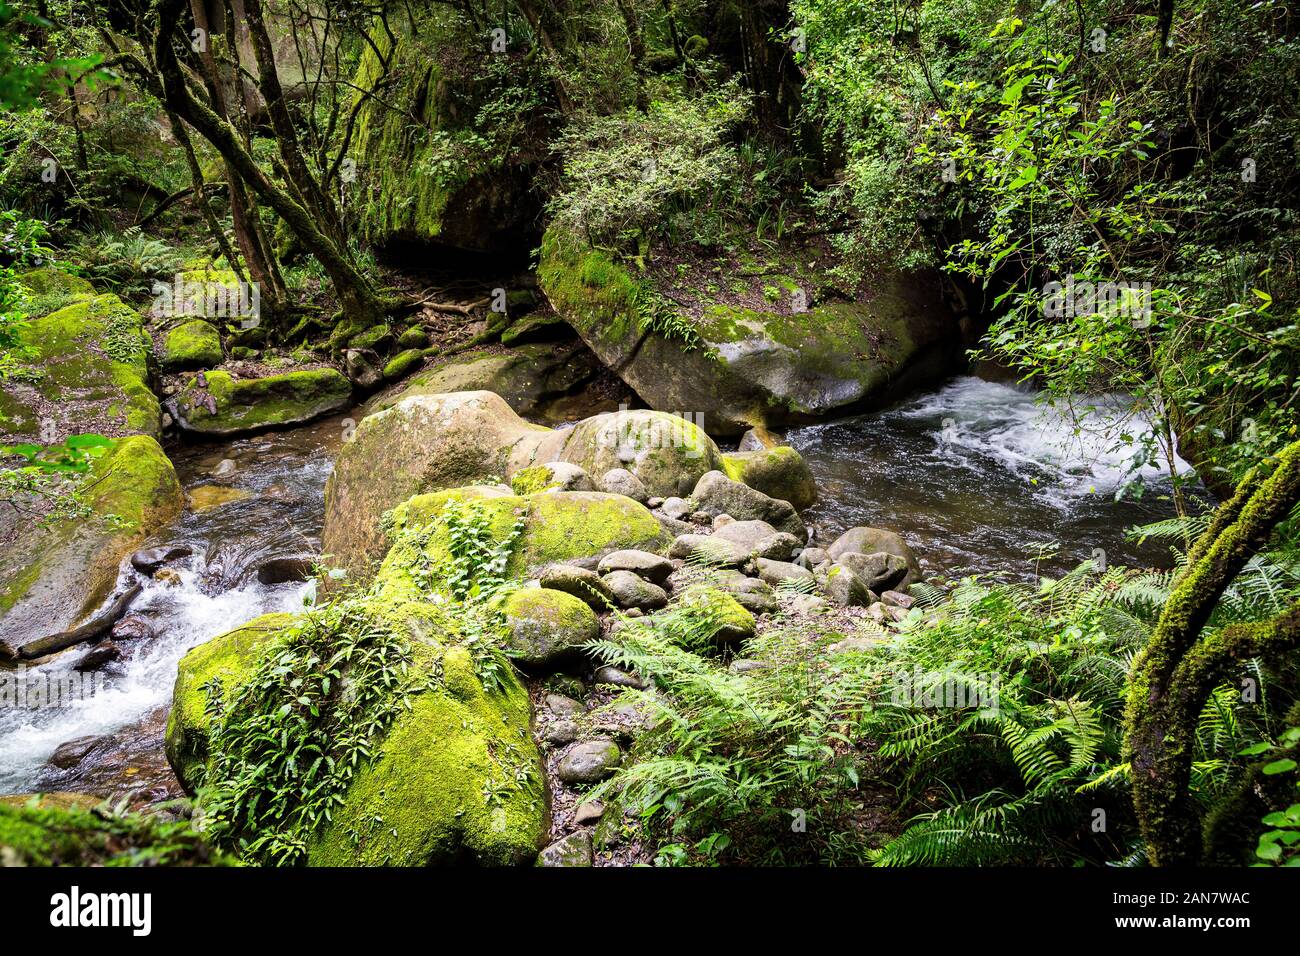 River eNdumeni in the middle of a dense forest, green tranquil landscape, Maloti Drakensberg Park, South Africa Stock Photo